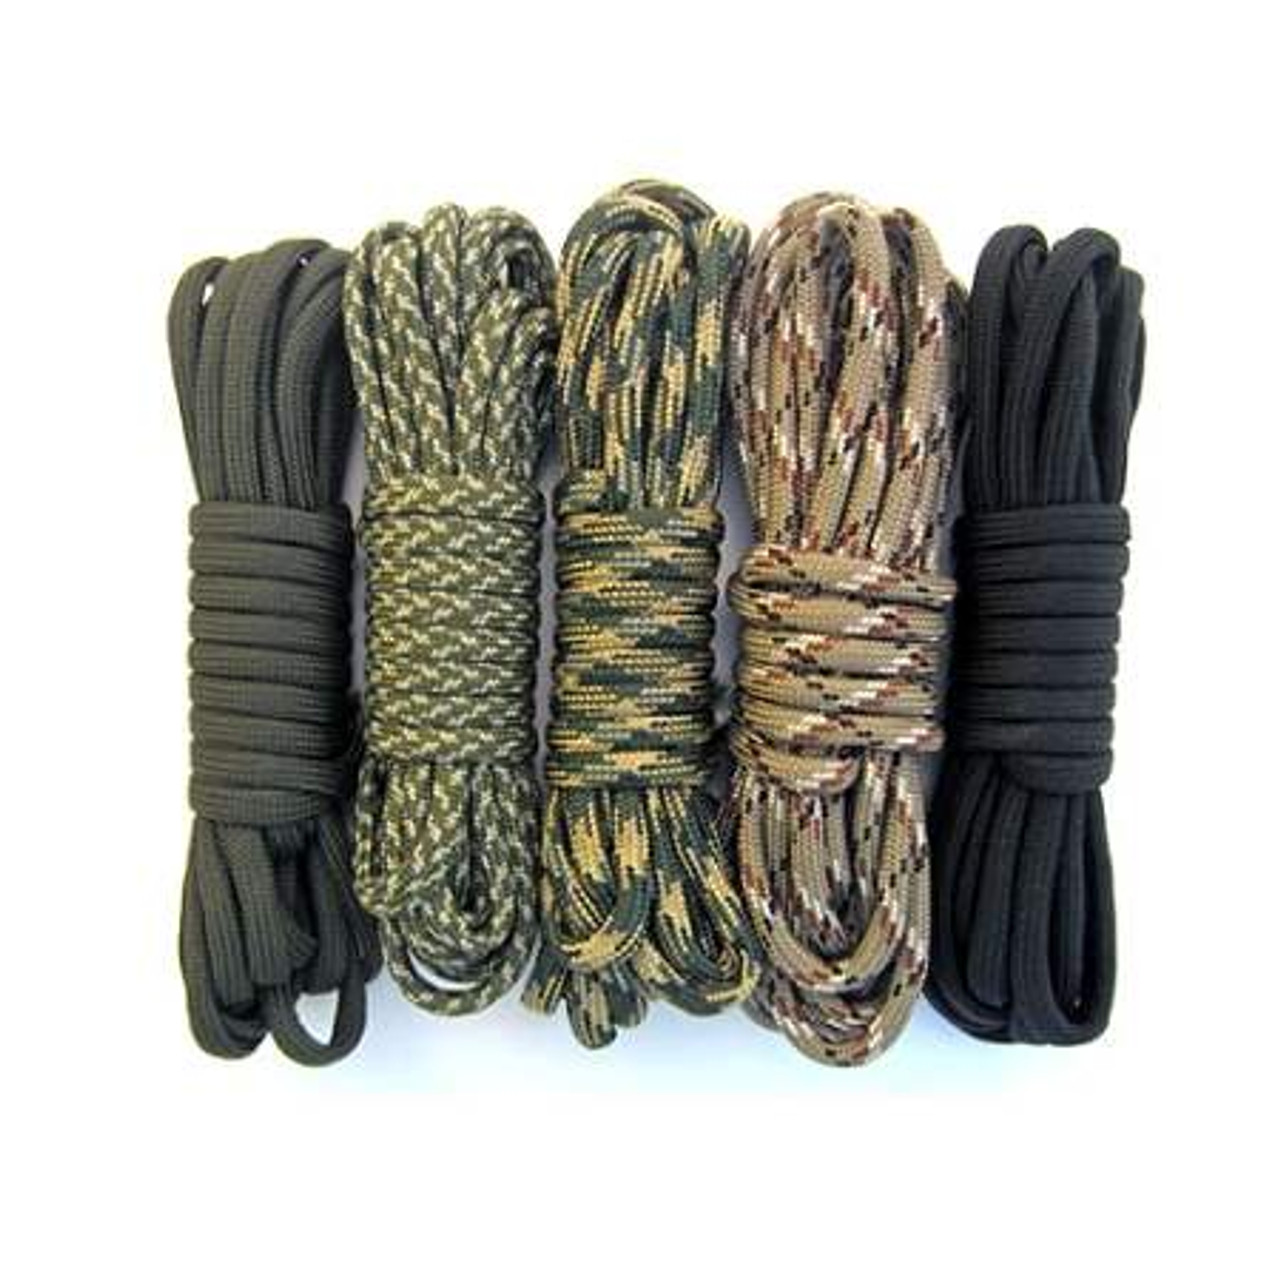 325 Paracord - Solid Colors